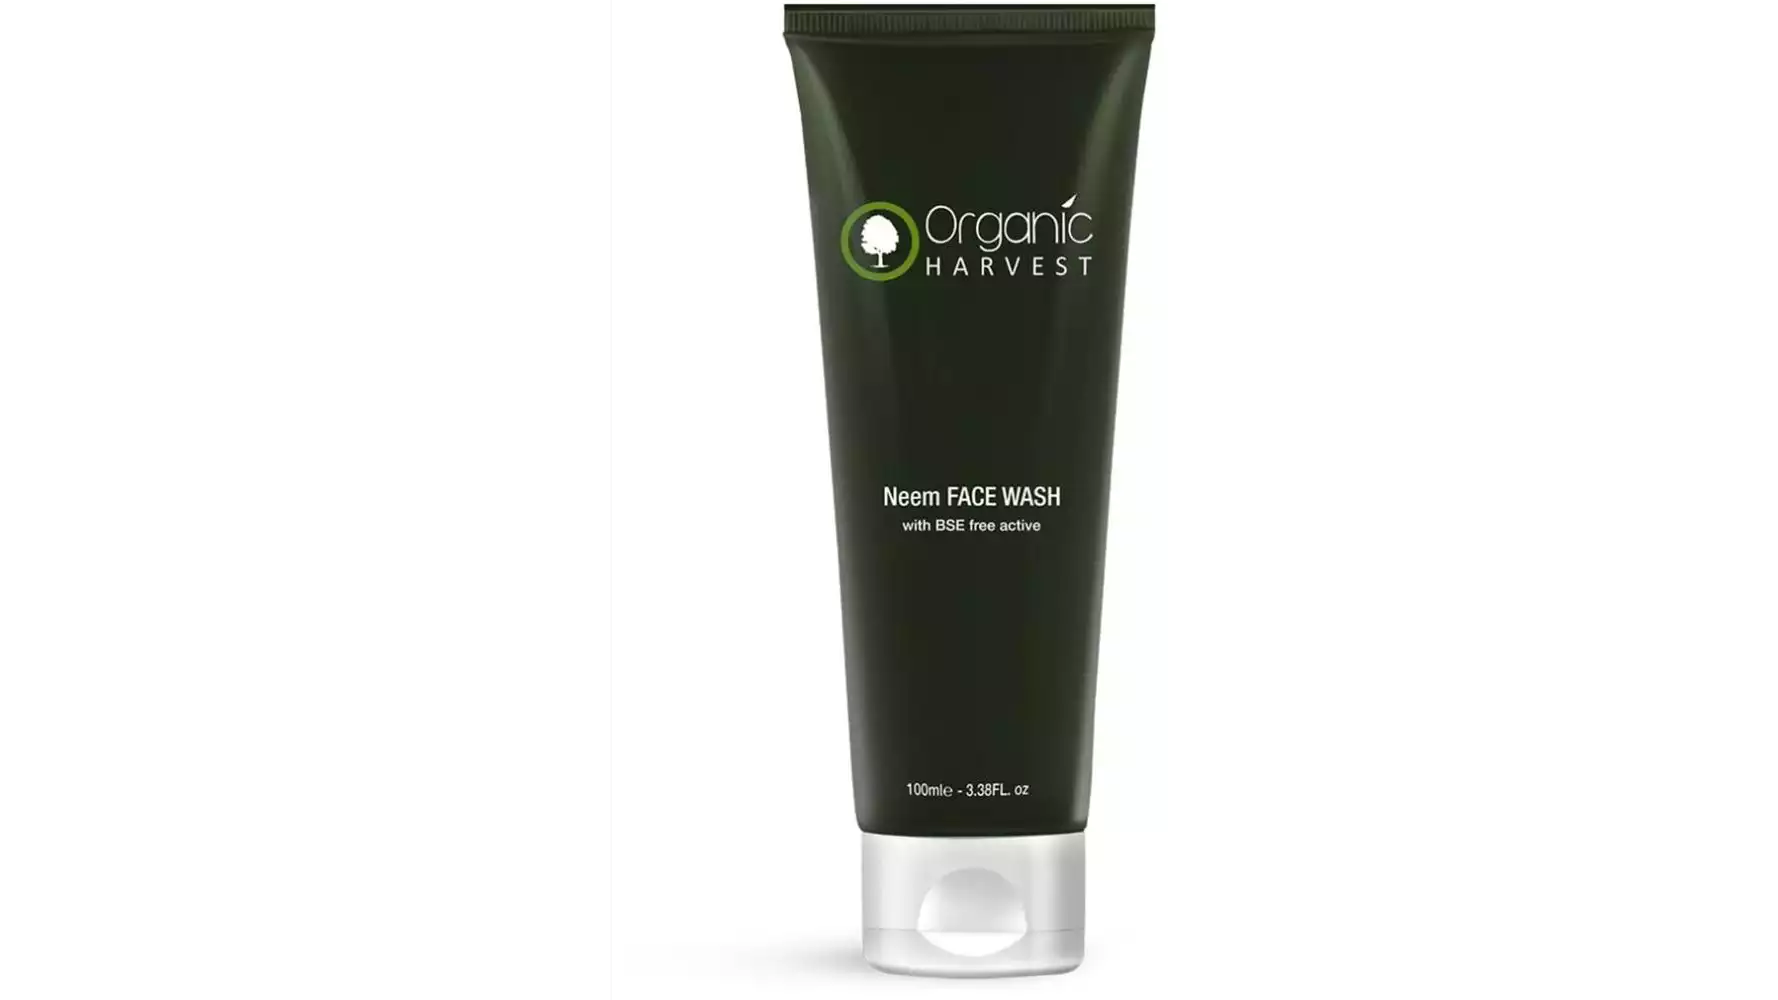 Organic Harvest Neem Face Wash (BSE Free Active) (100g)